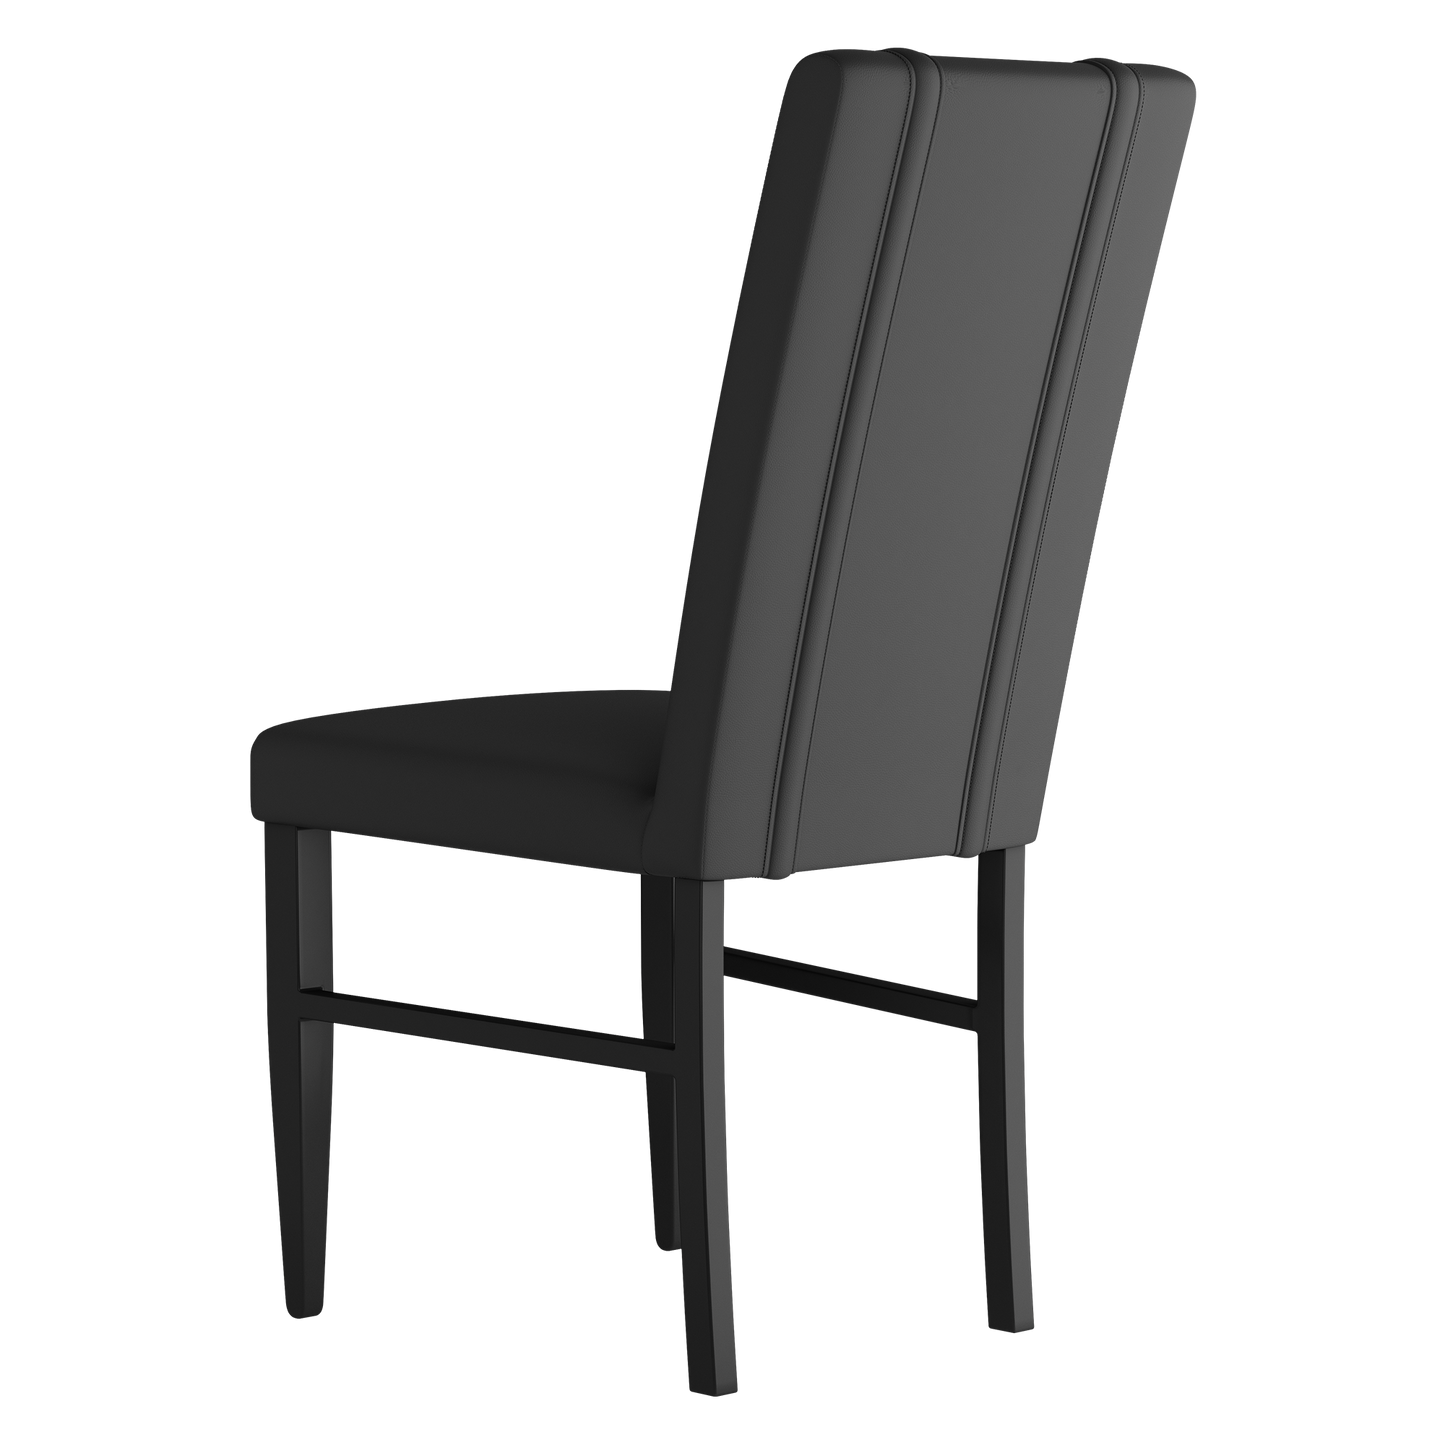 Side Chair 2000 with New York Mets Secondary Set of 2